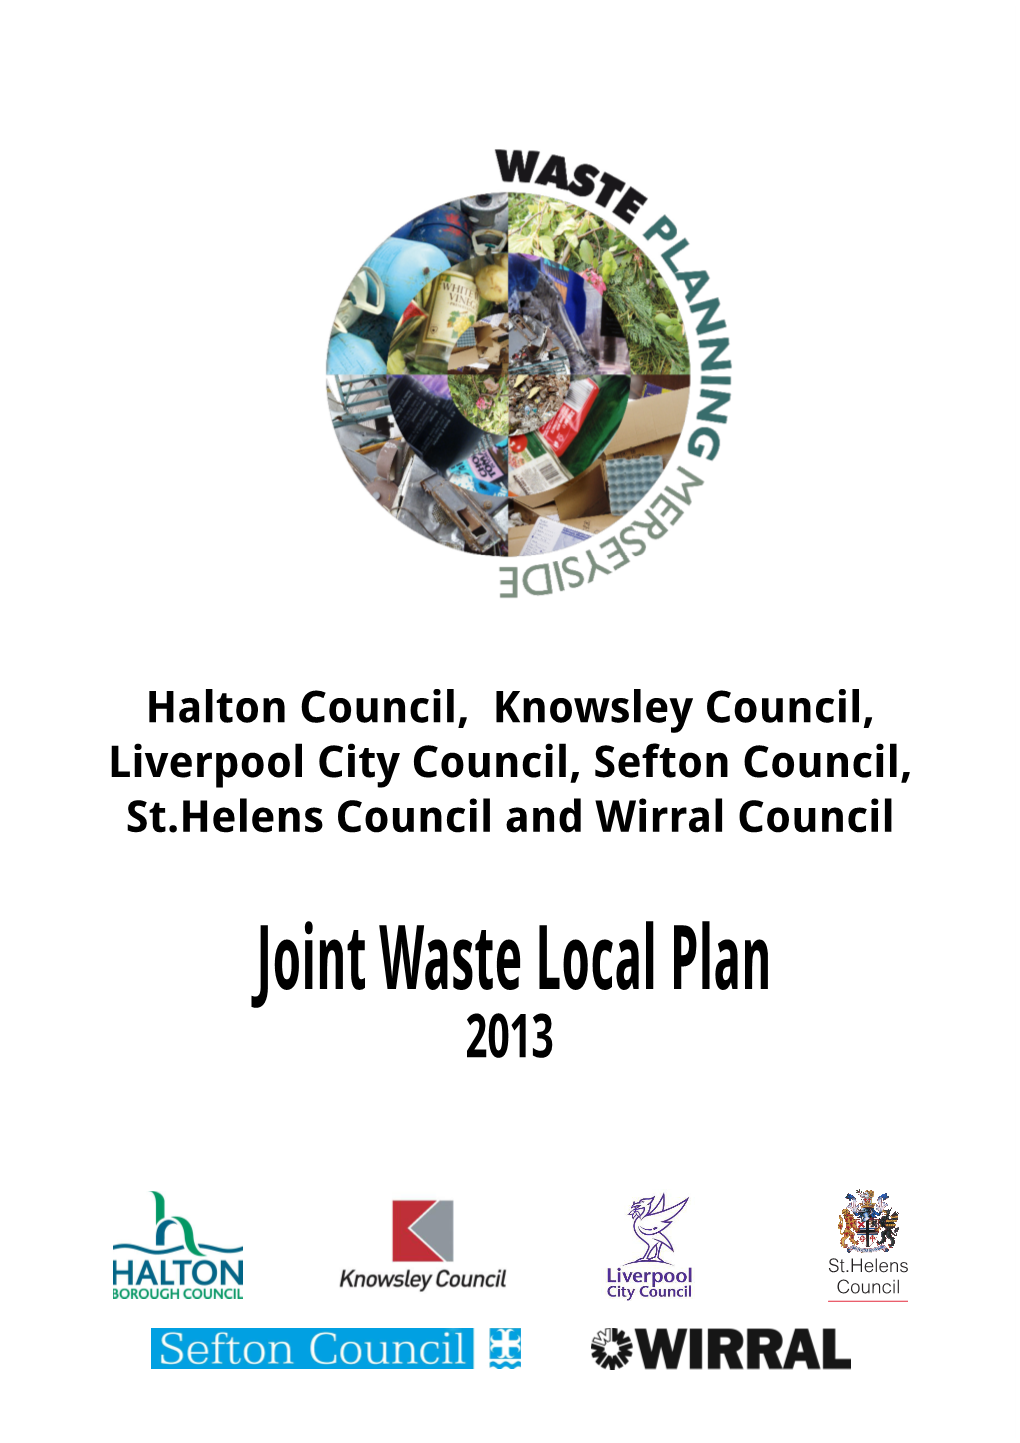 Adopted Waste Local Plan